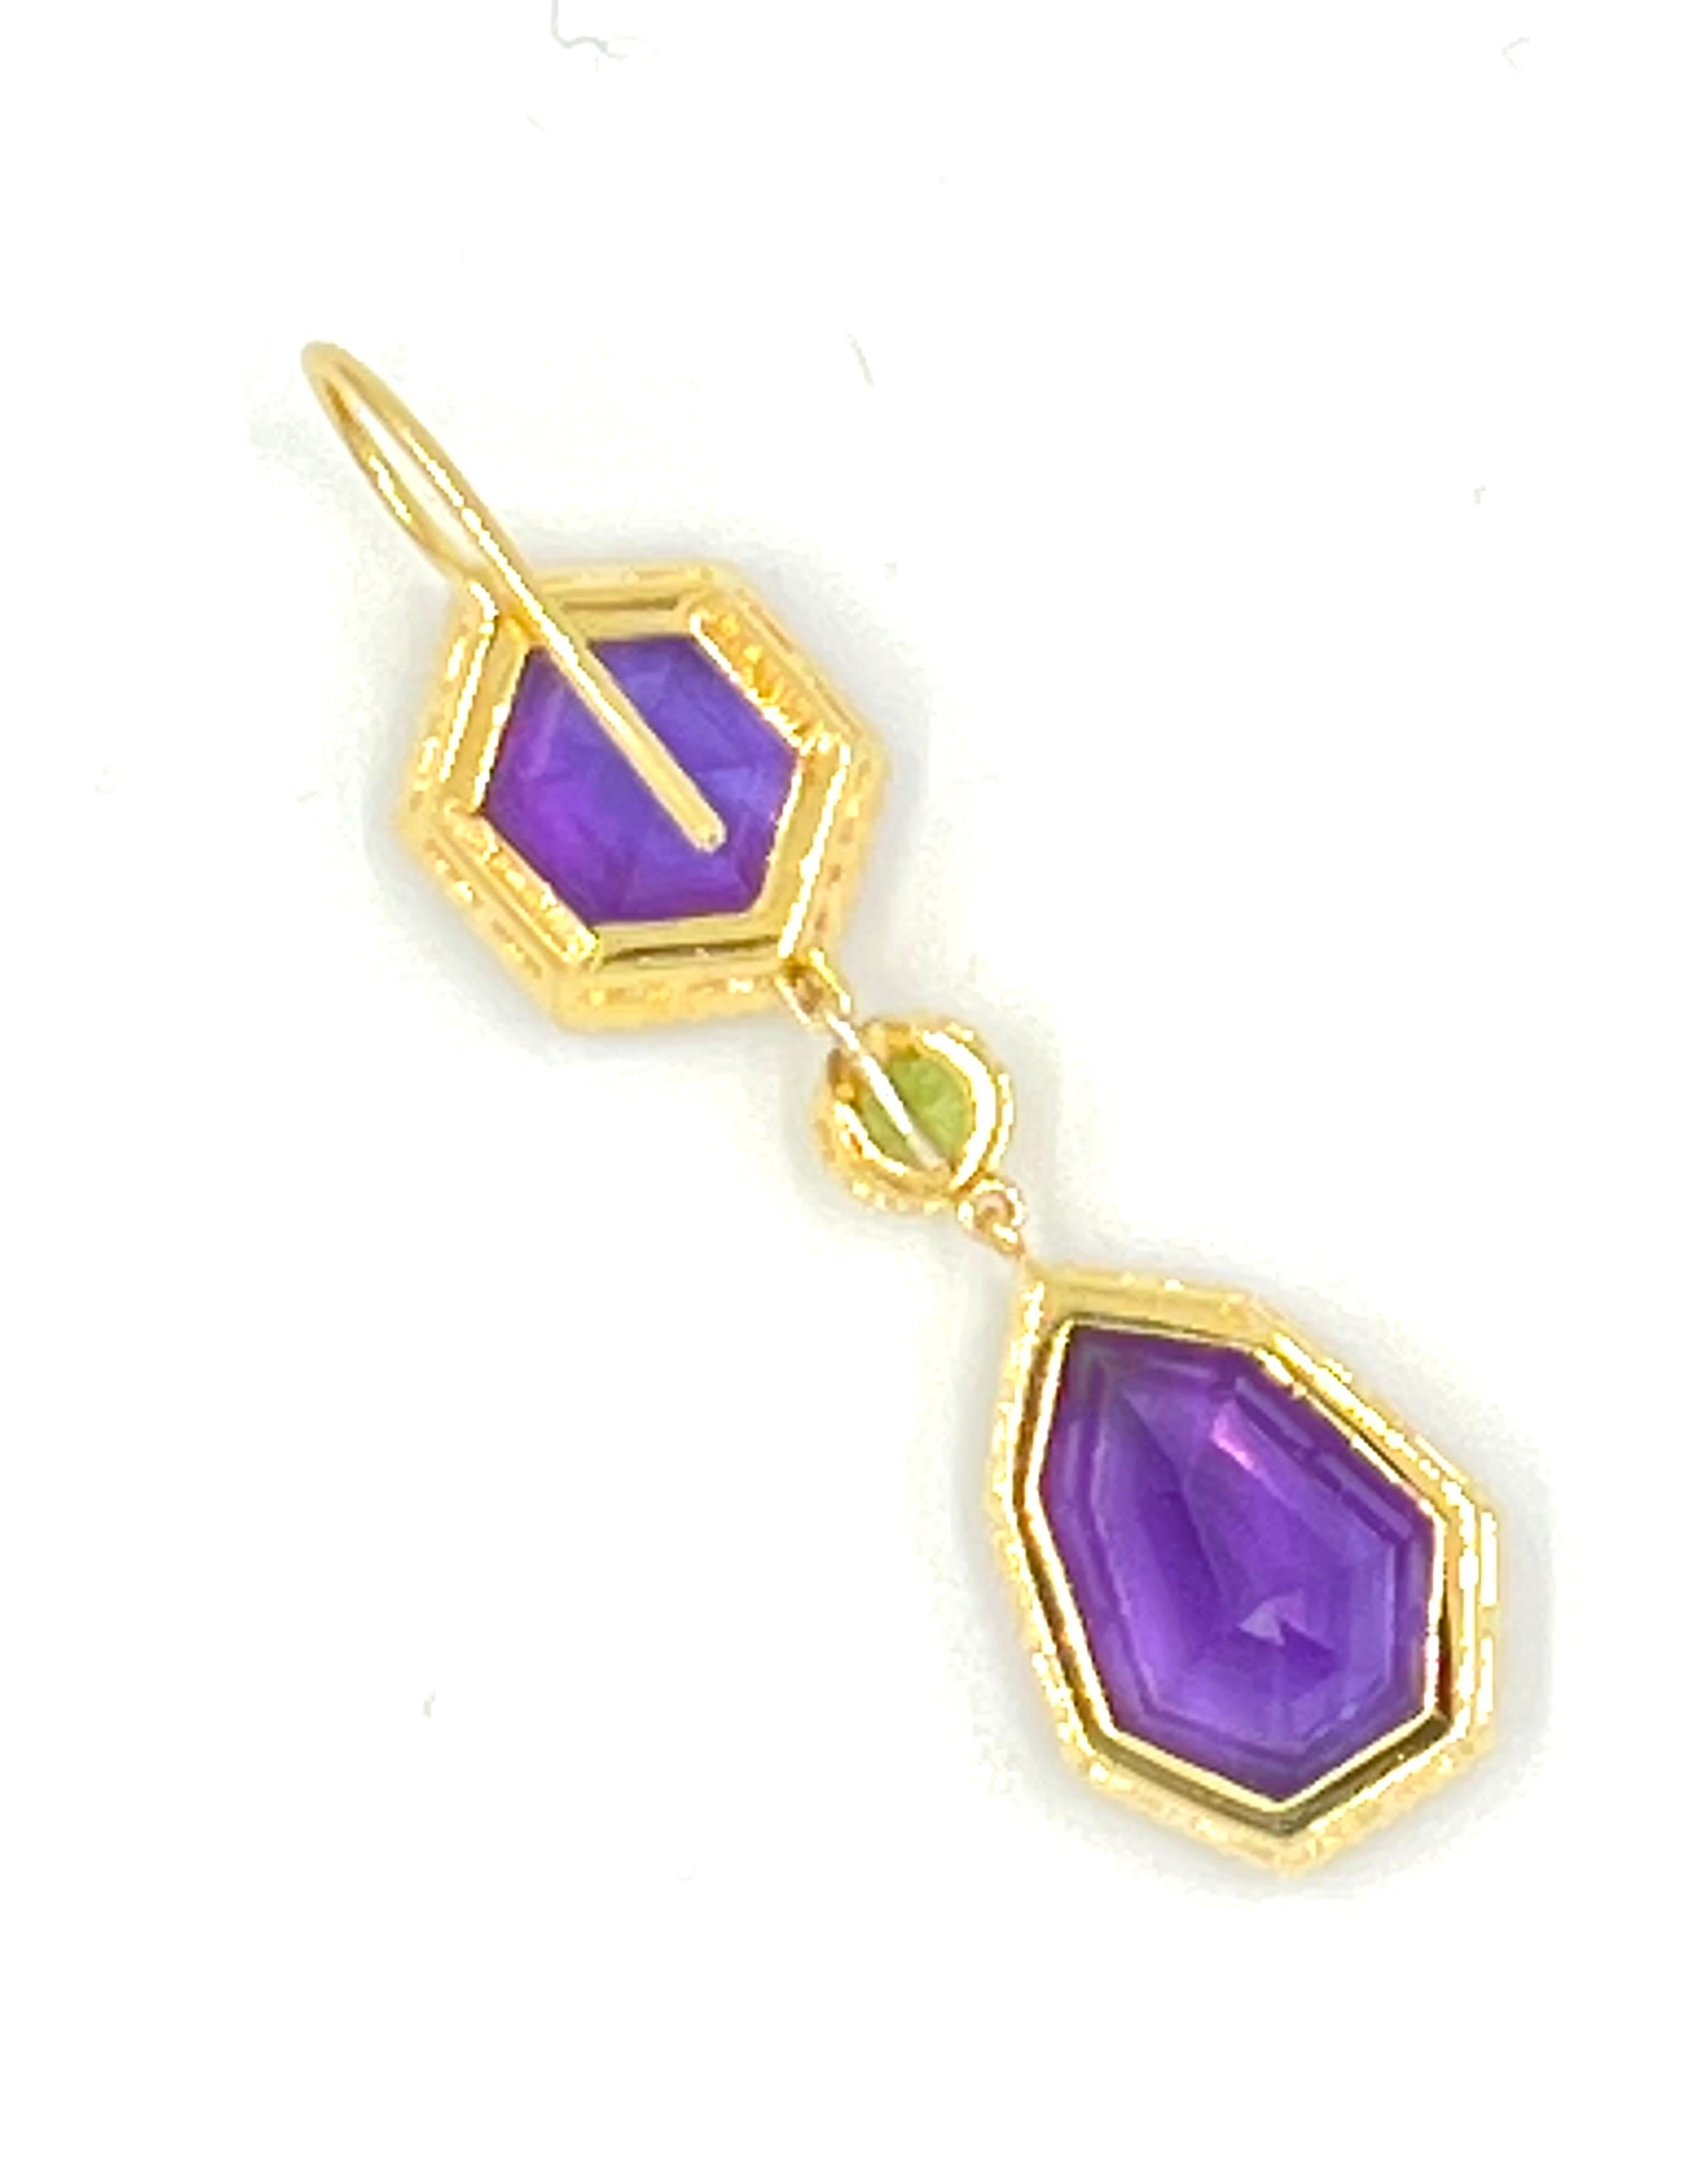 Estate Verdura 'Byzantine' pendant earrings, featuring a top section each set with hexagonal faceted amethyst (15 x 12mm) suspending detachable drops each set with a shield-shaped faceted amethyst (19 x 13mm) accented by a round faceted peridot at